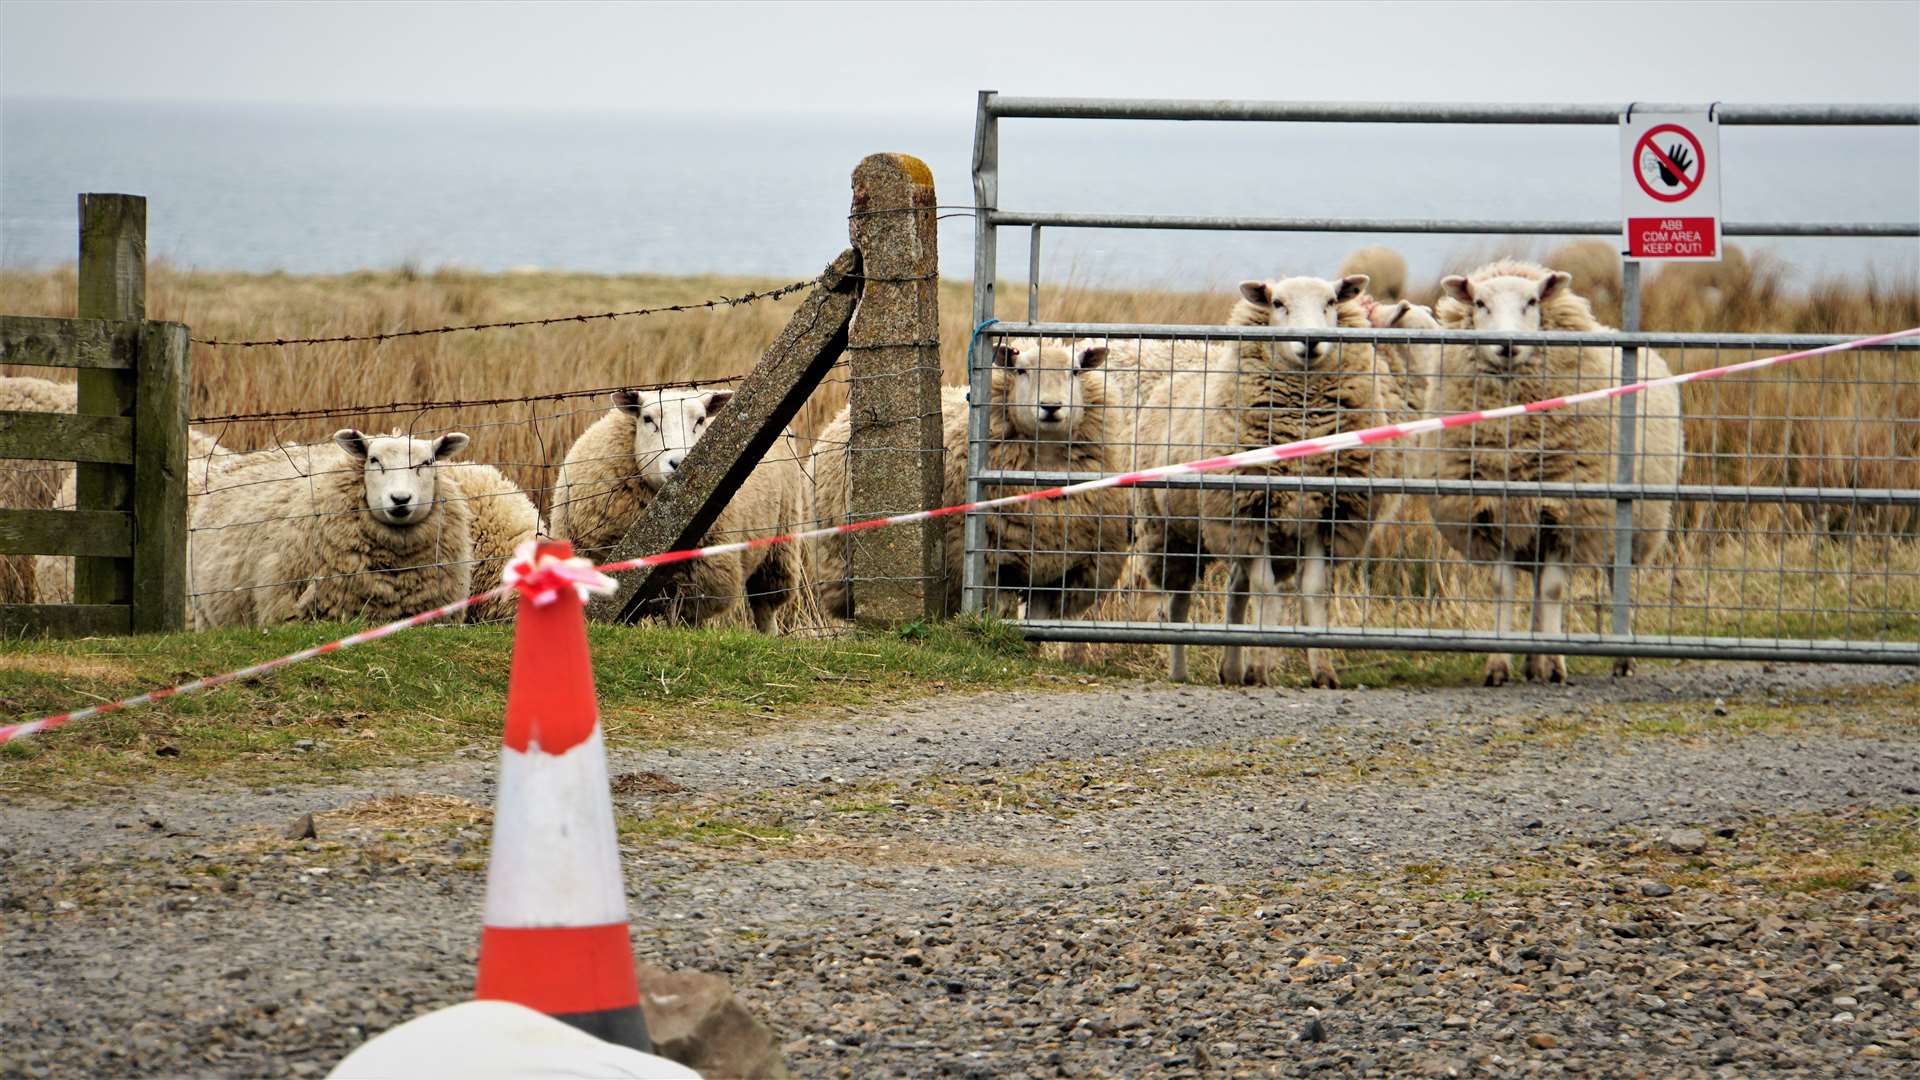 A flock of sheep were the only 'visitors' at Noss Head car park on Easter Sunday.